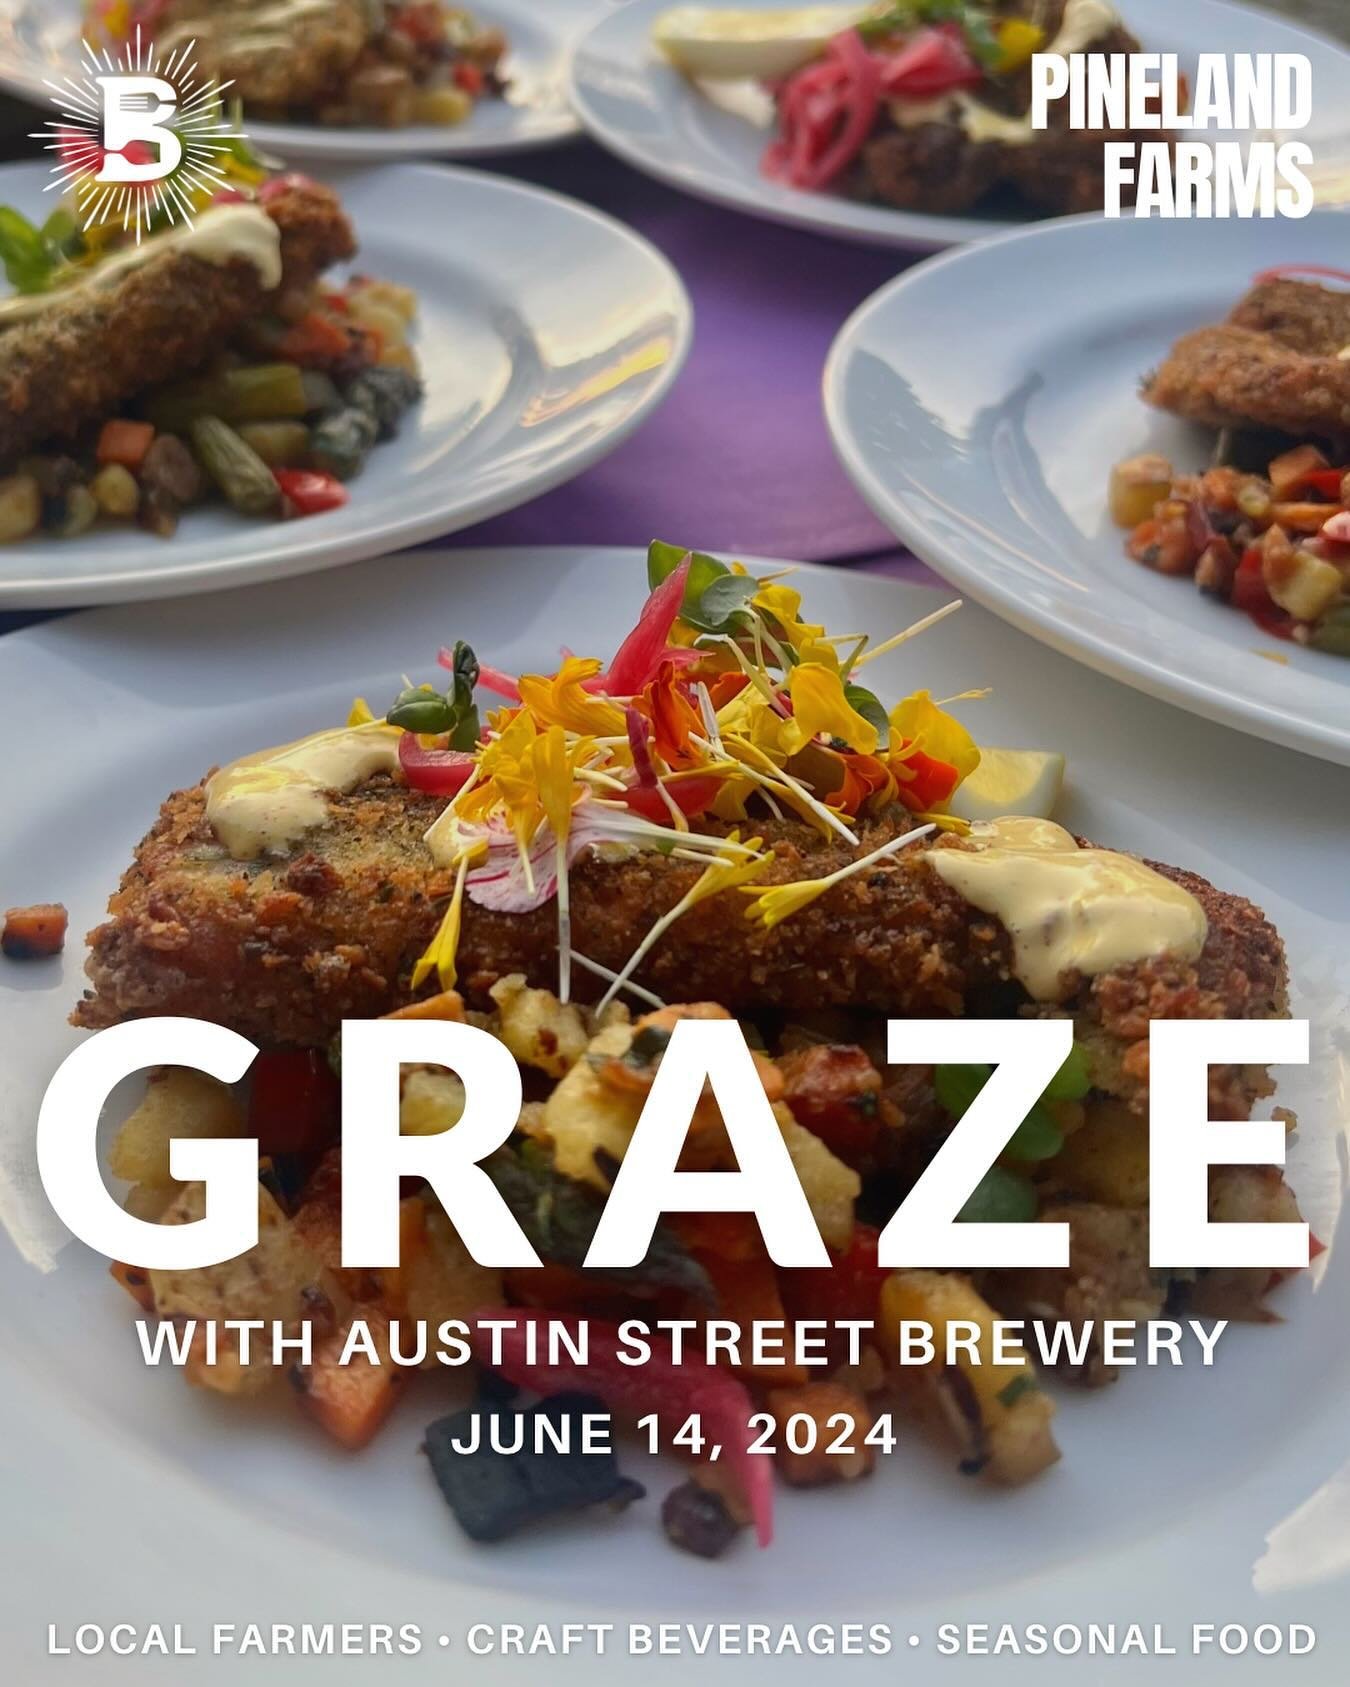 The countdown is on! Less than one month until the first Graze of 2024 with @austinstreetbrewery!✨ Join us for the perfect summer evening in Maine with a thoughtfully prepared four-course dinner featuring local farms and ingredients, delicious bevera